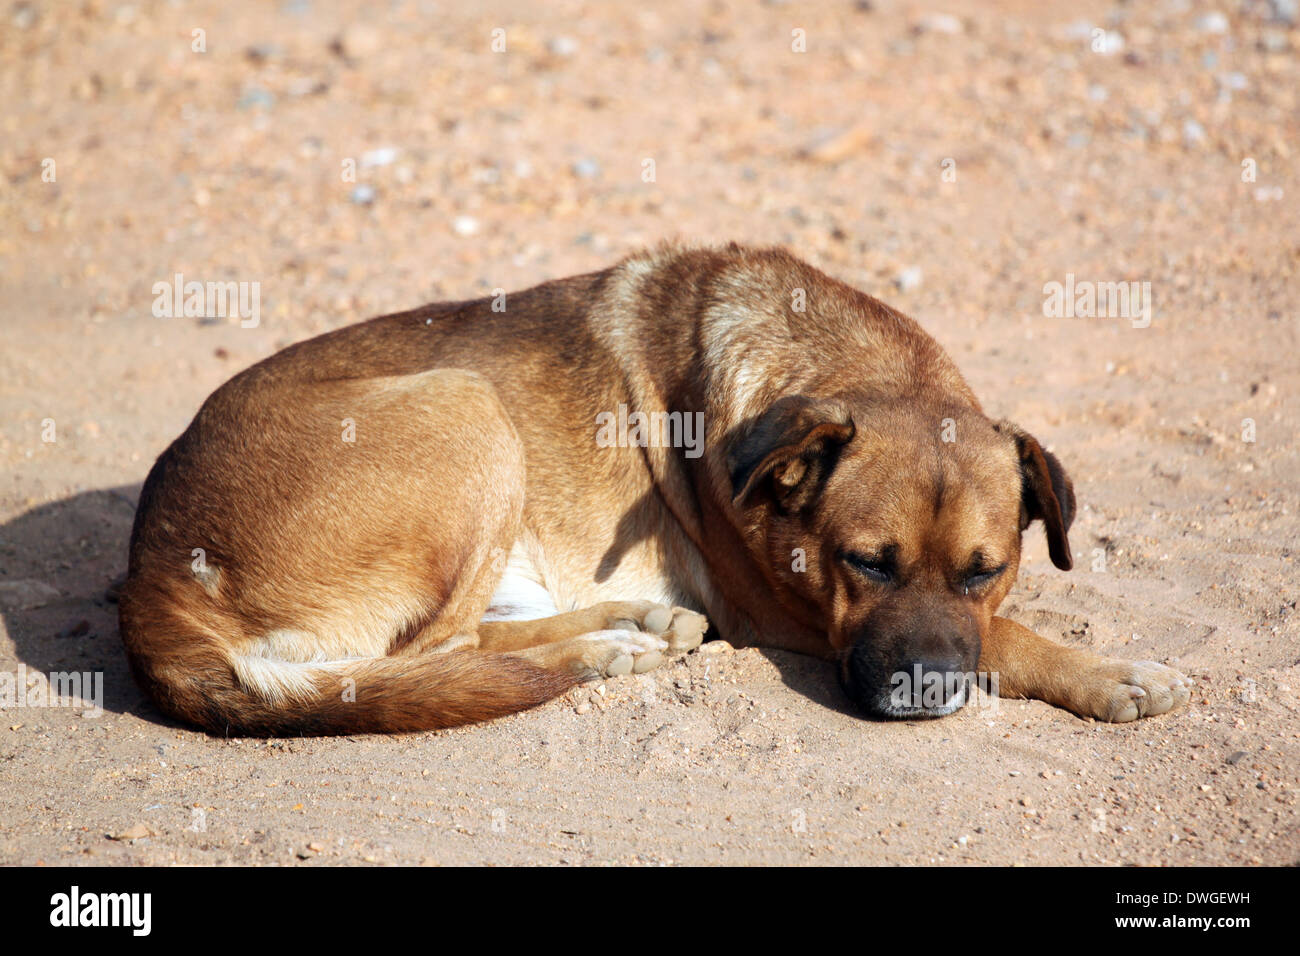 Sleeping Dog on the ground in rural. Stock Photo